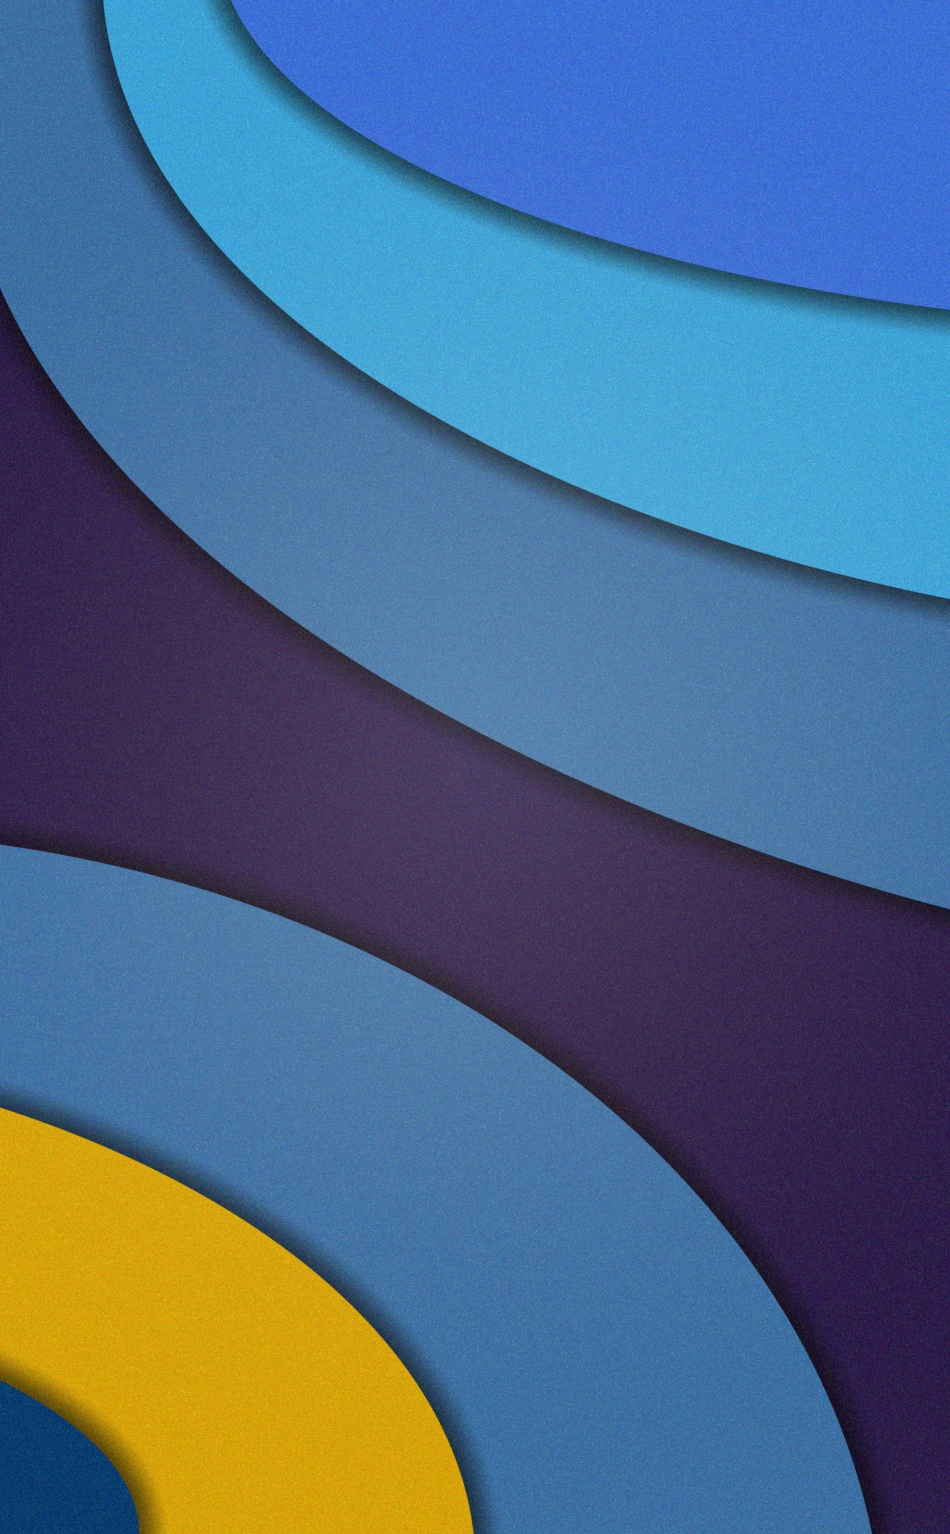 Download wallpaper 950x1534 material design, curves, abstract, iphone ...